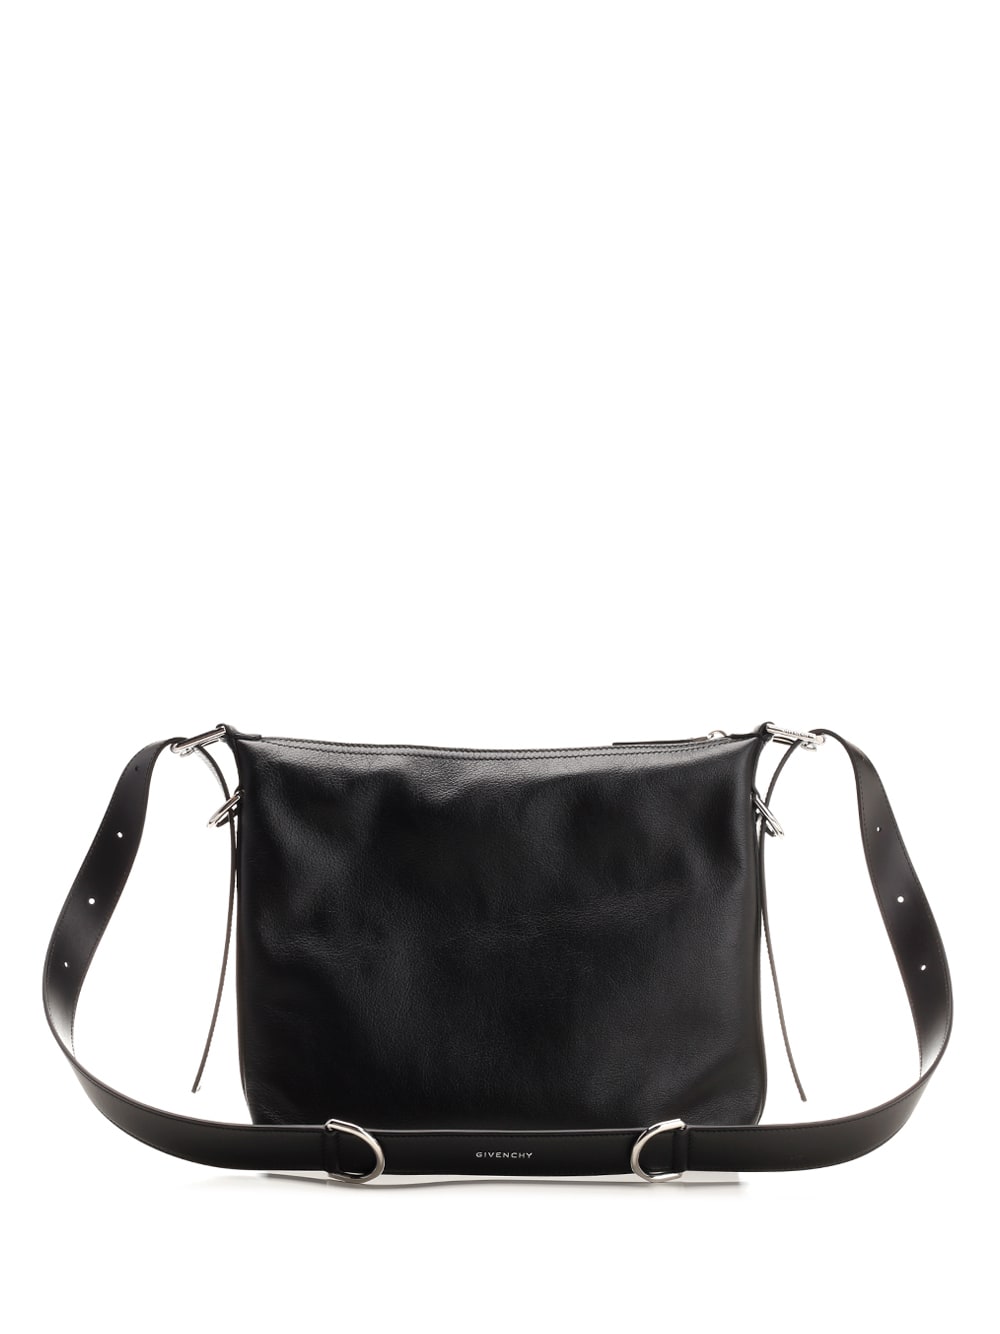 Shop Givenchy Voyou Leather Bag In Black